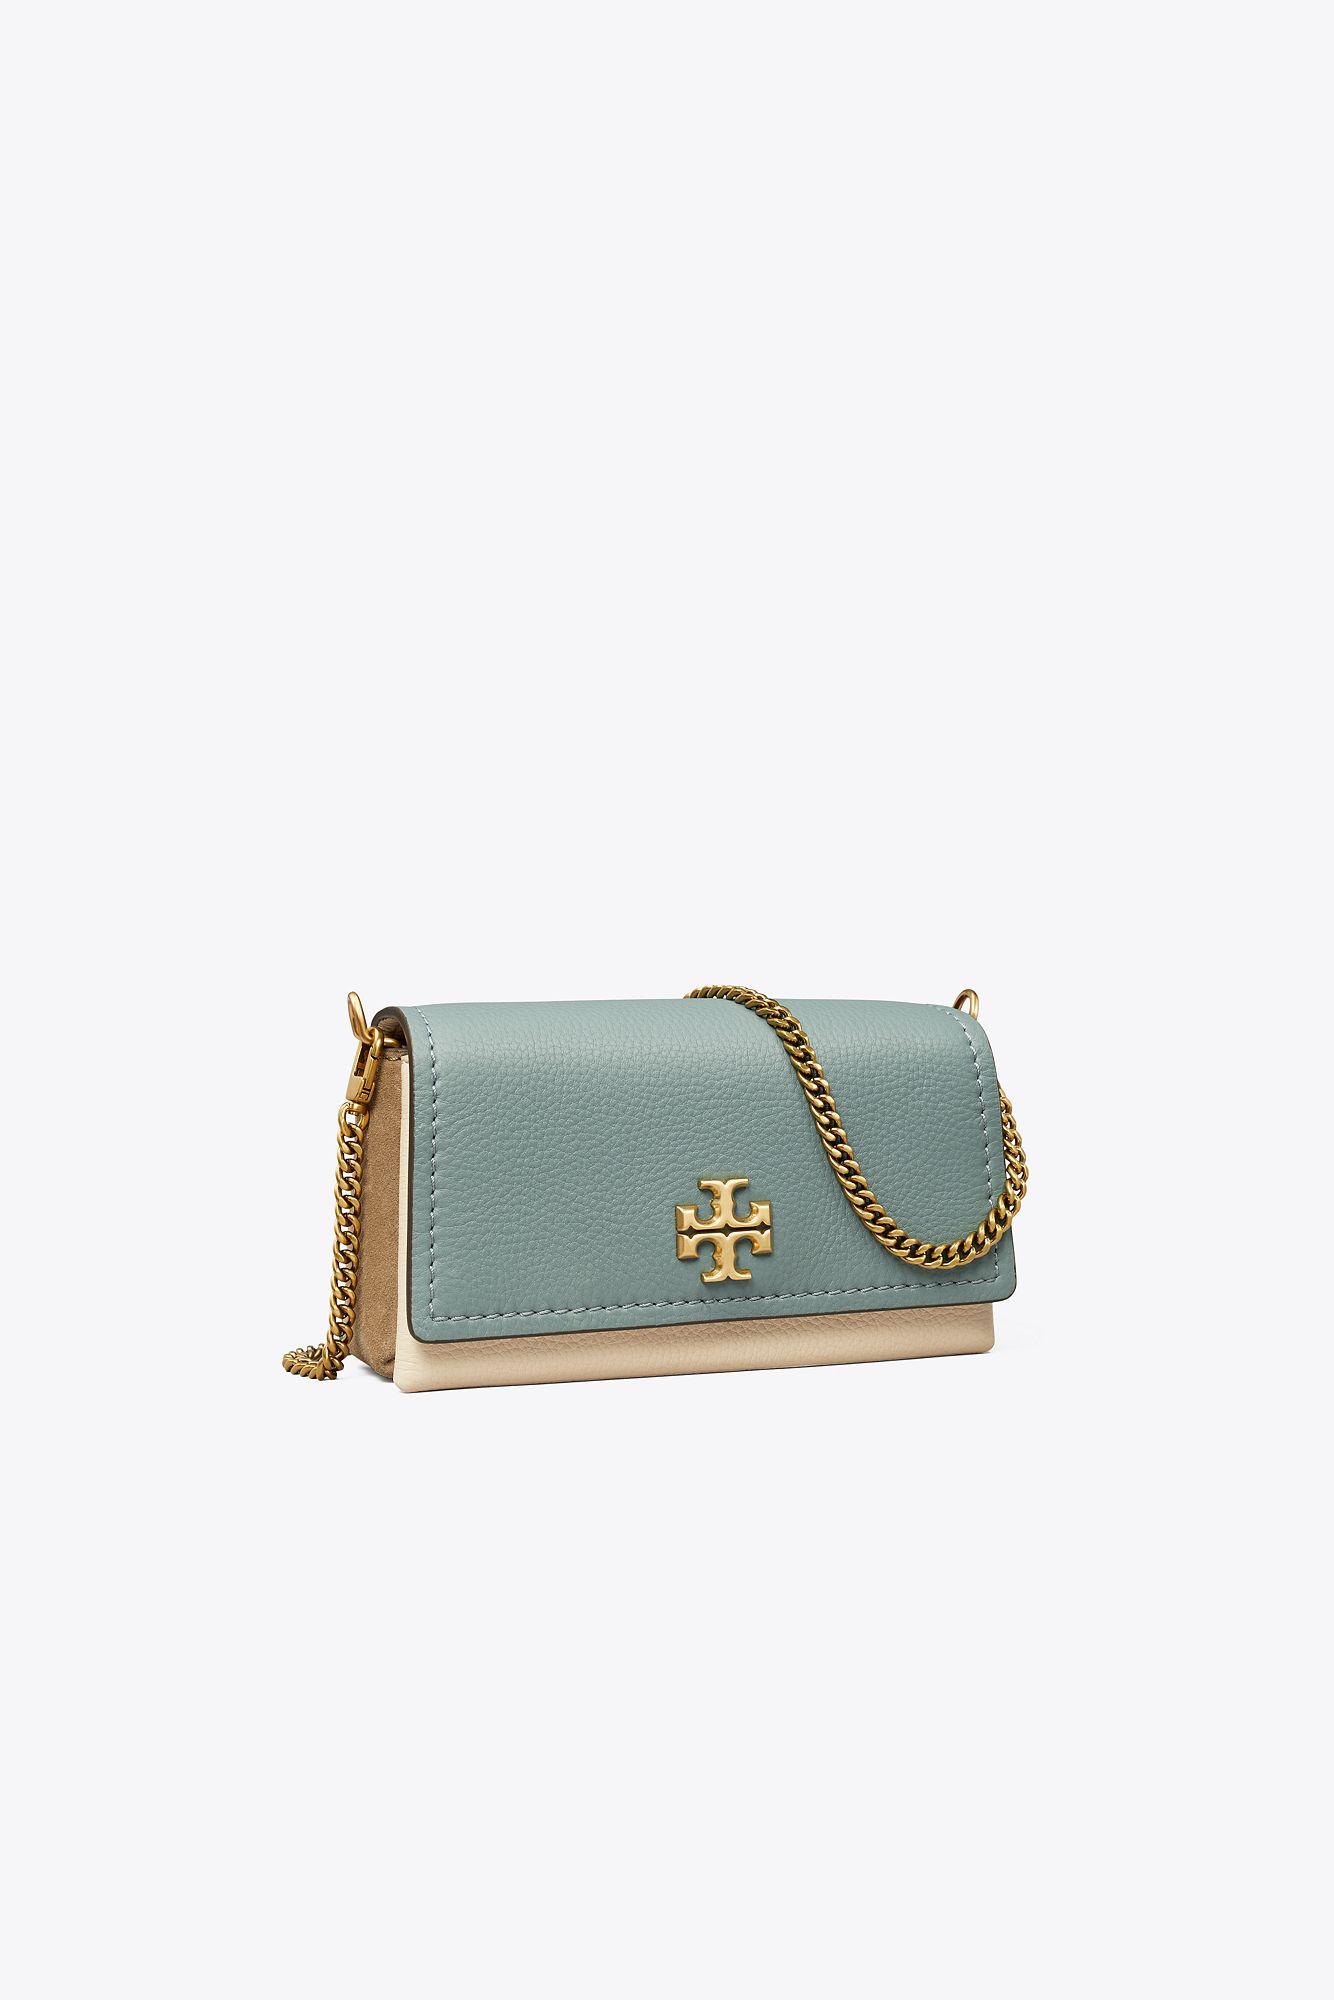 Tory Burch Limited-edition Mini Bag in Blue